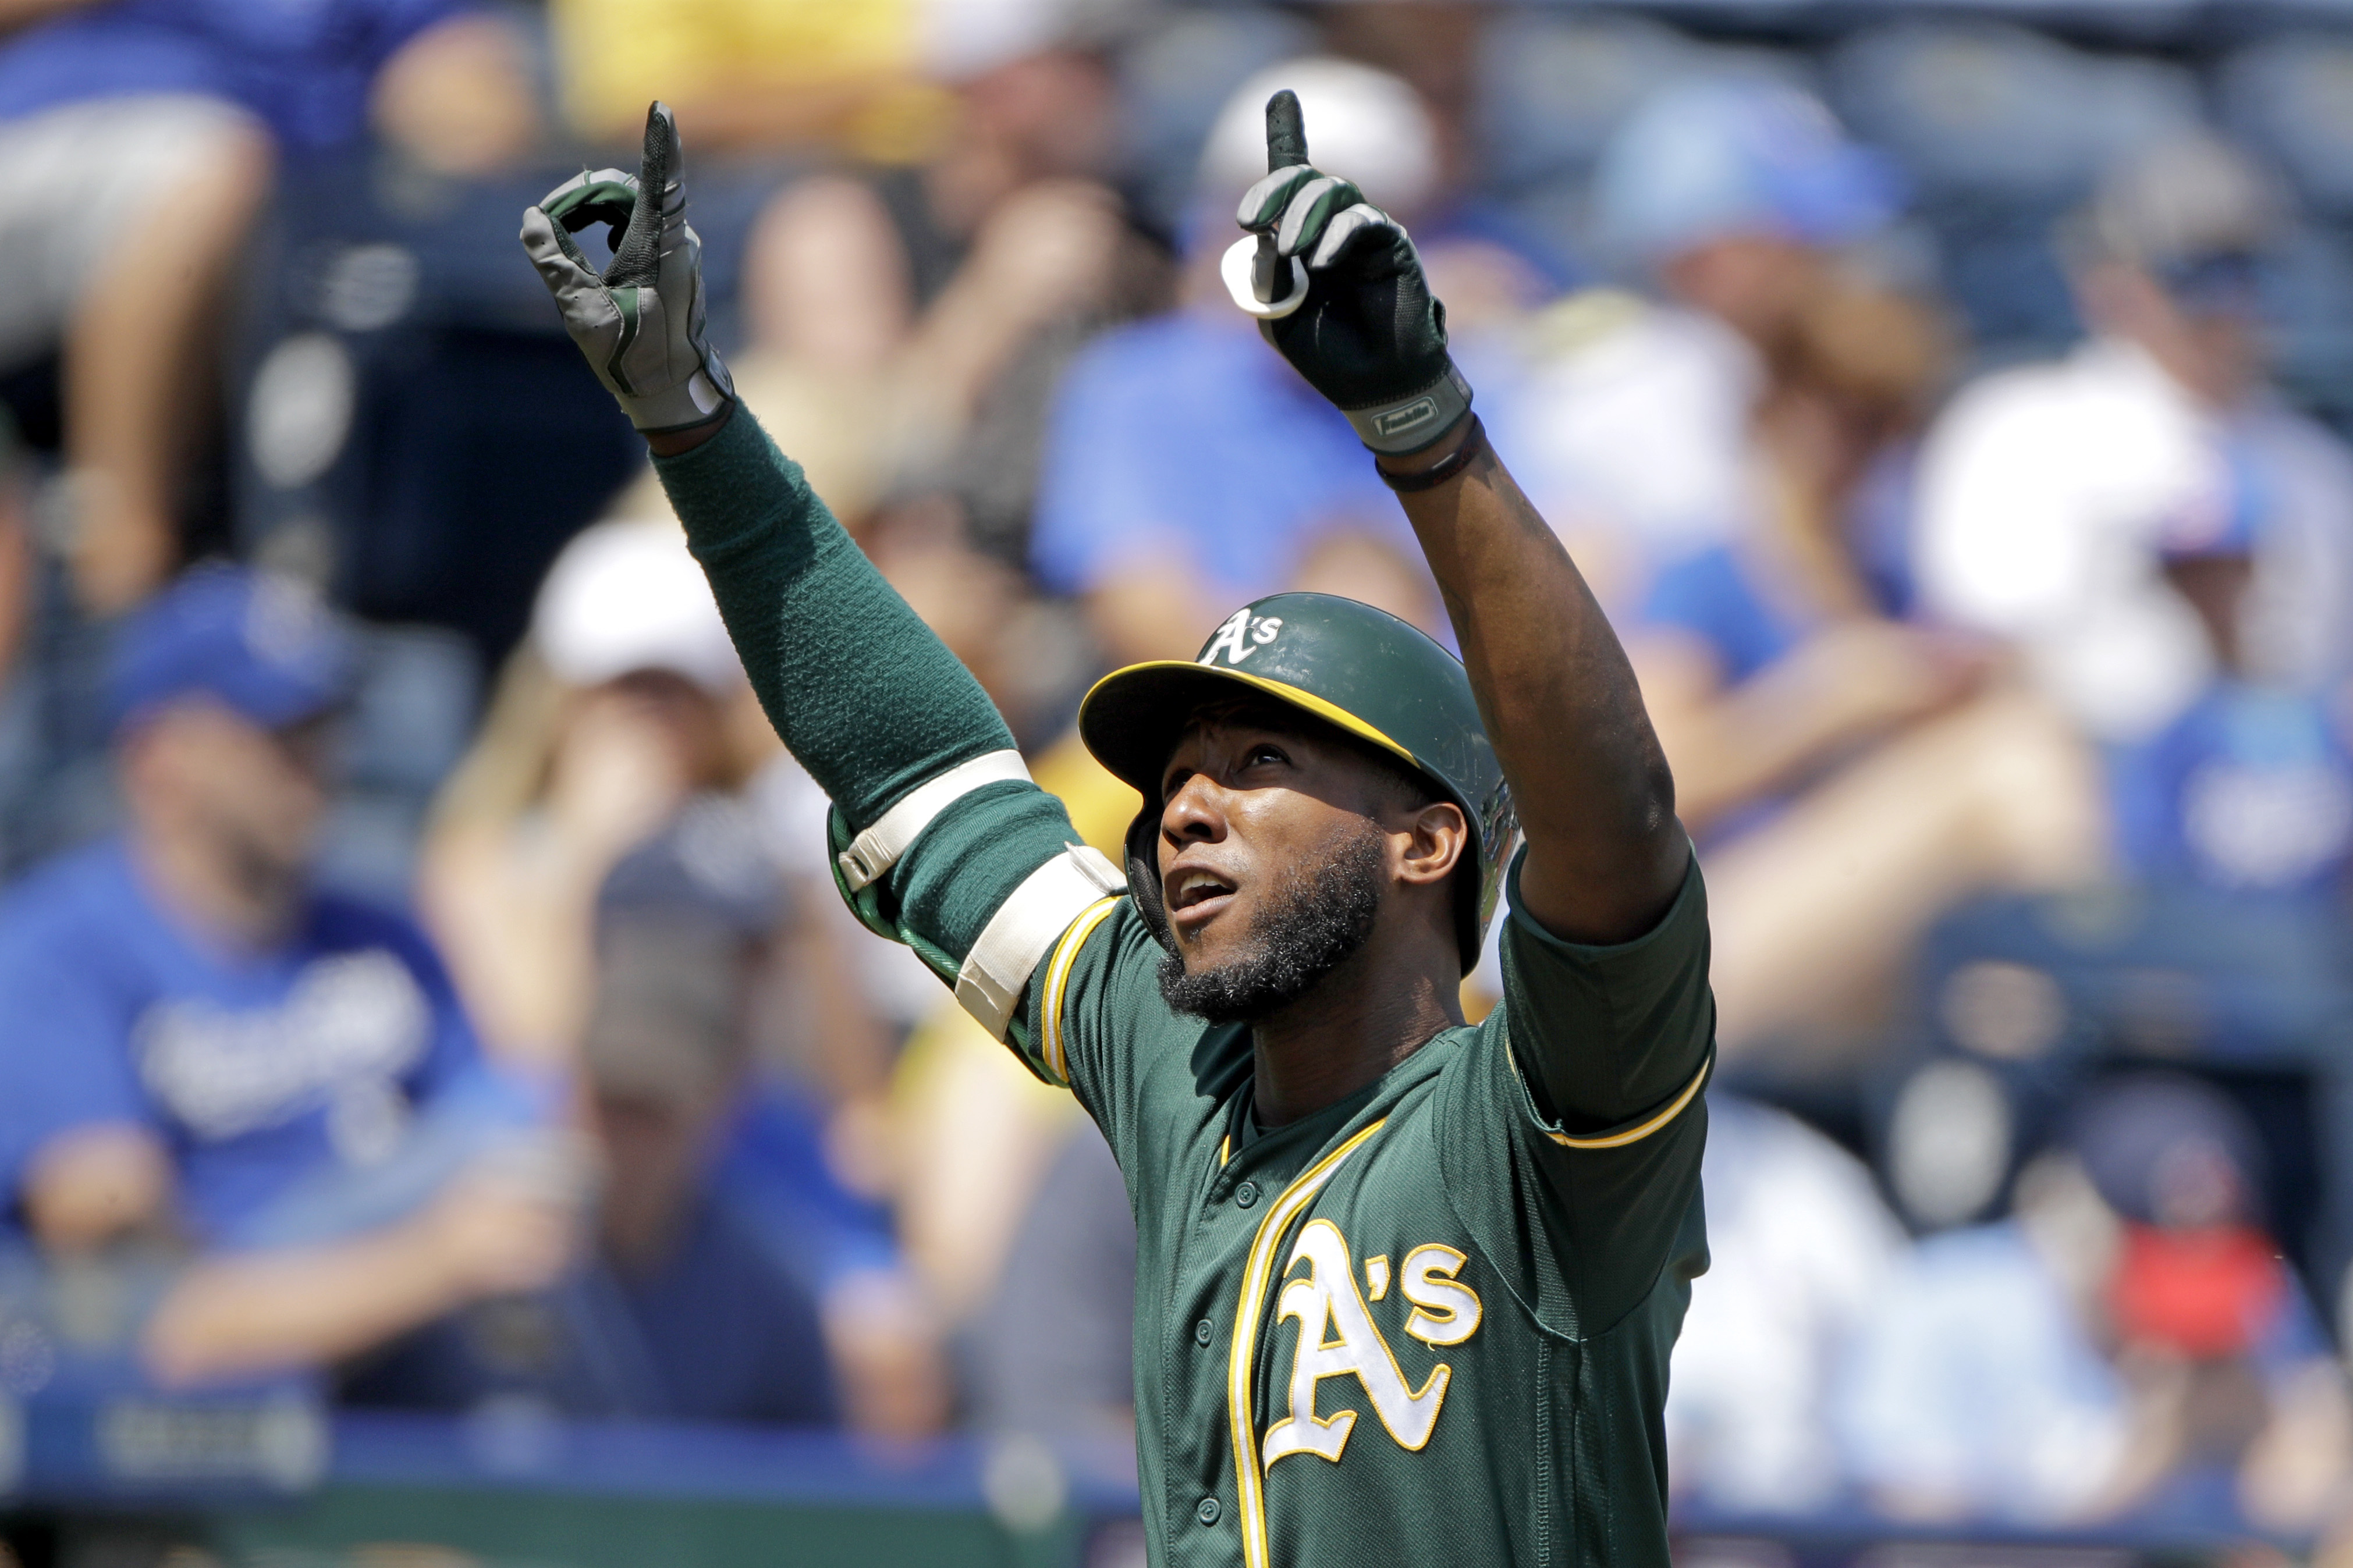 Profar homers, A's hold off Royals 9-8 to take 4-game series